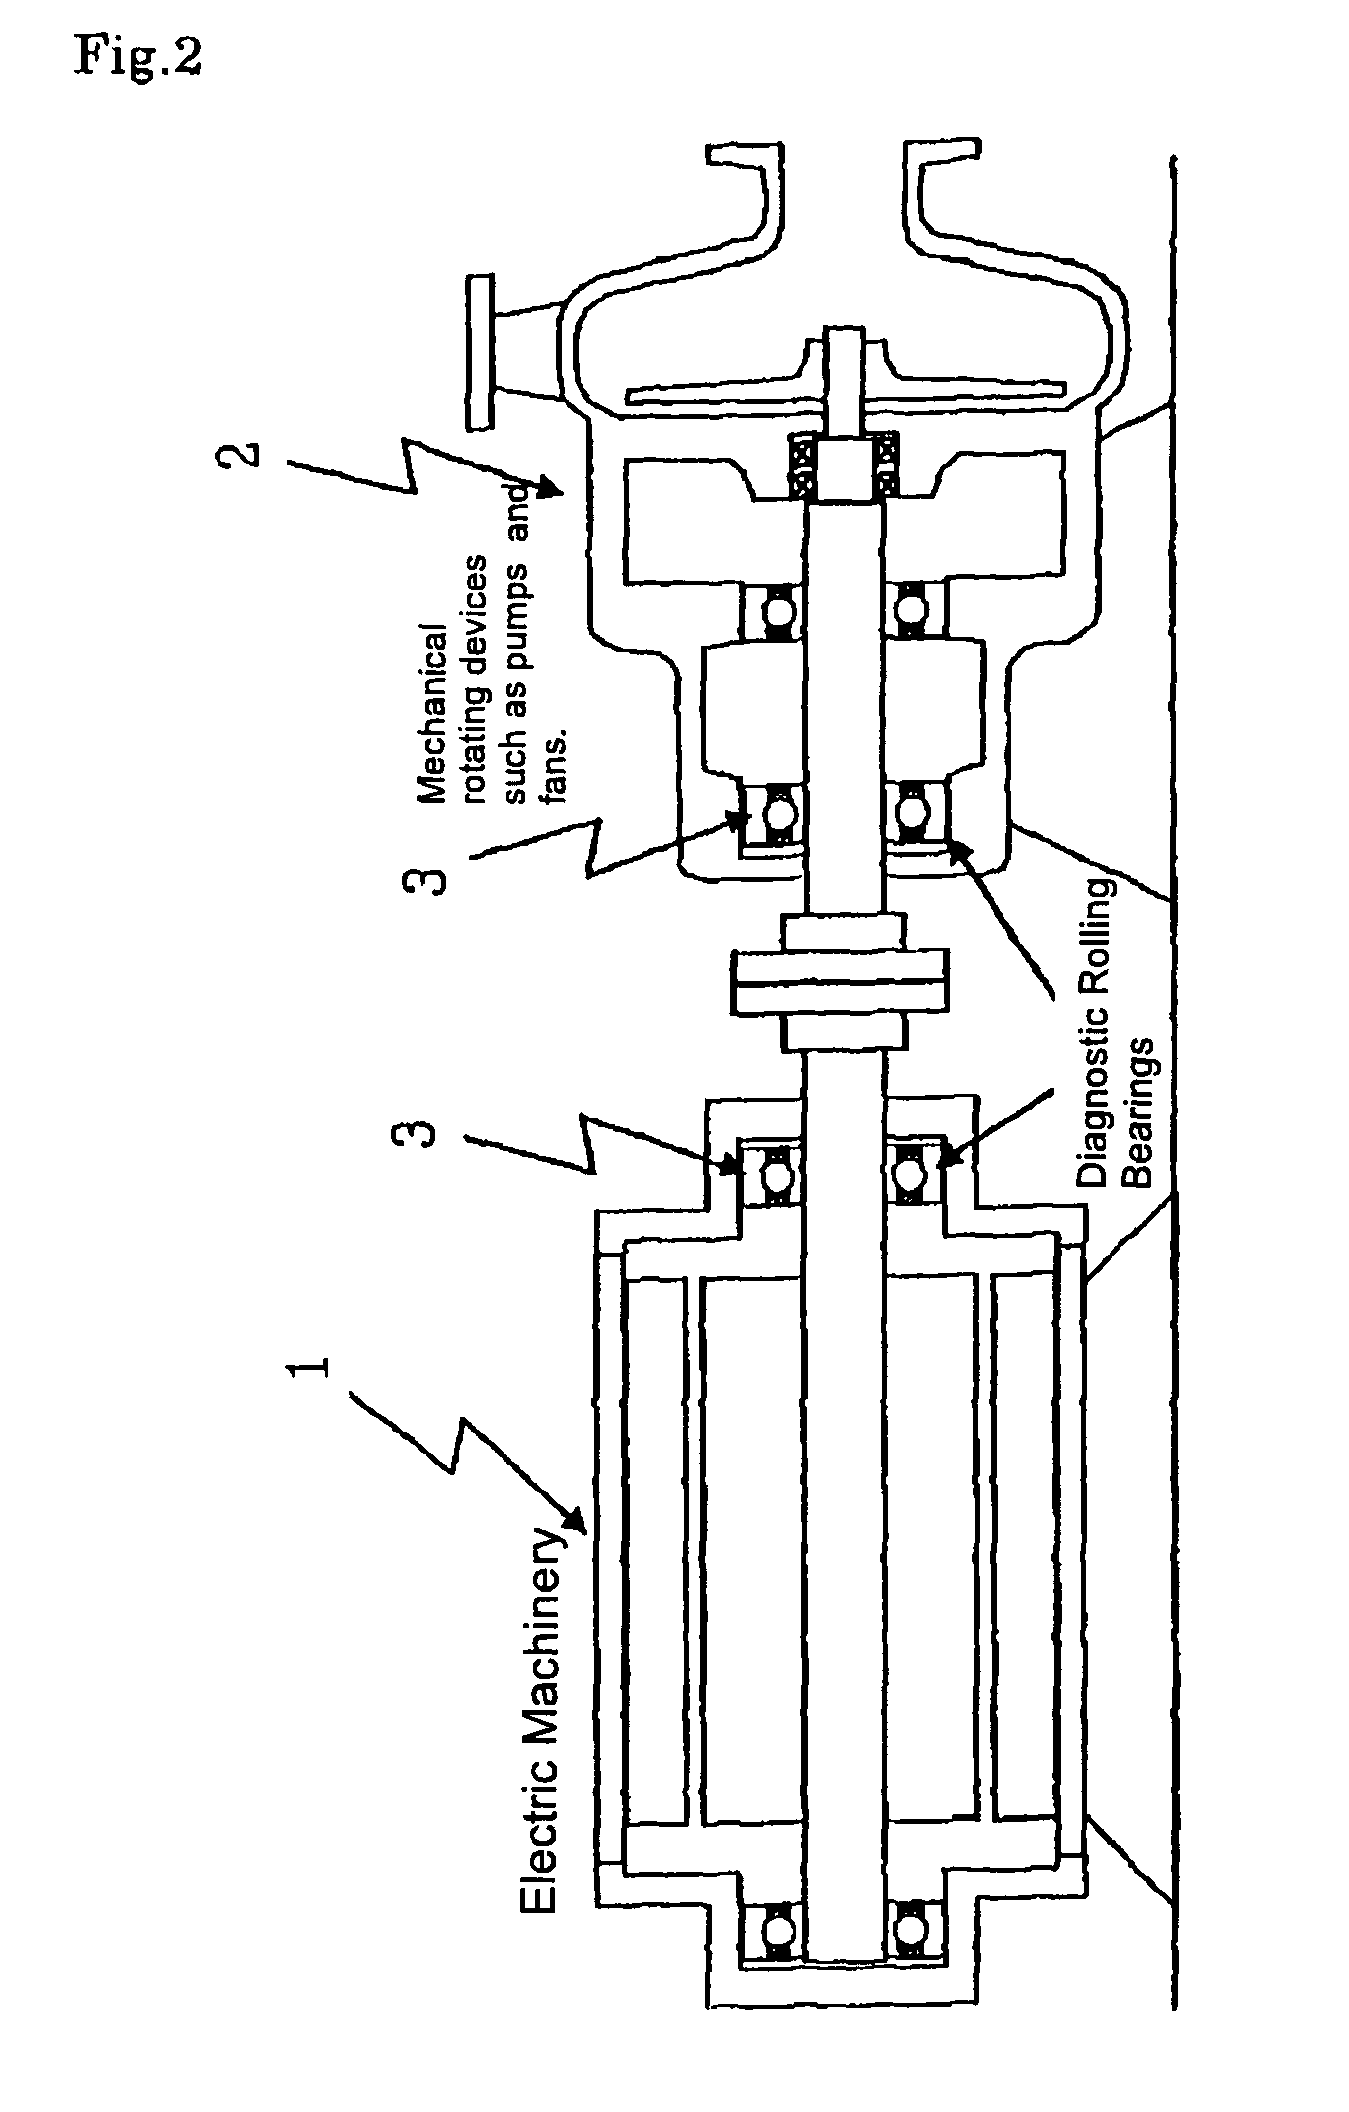 Method of predicting residual service life for rolling bearings and a device for predicting residual service life for rolling bearings